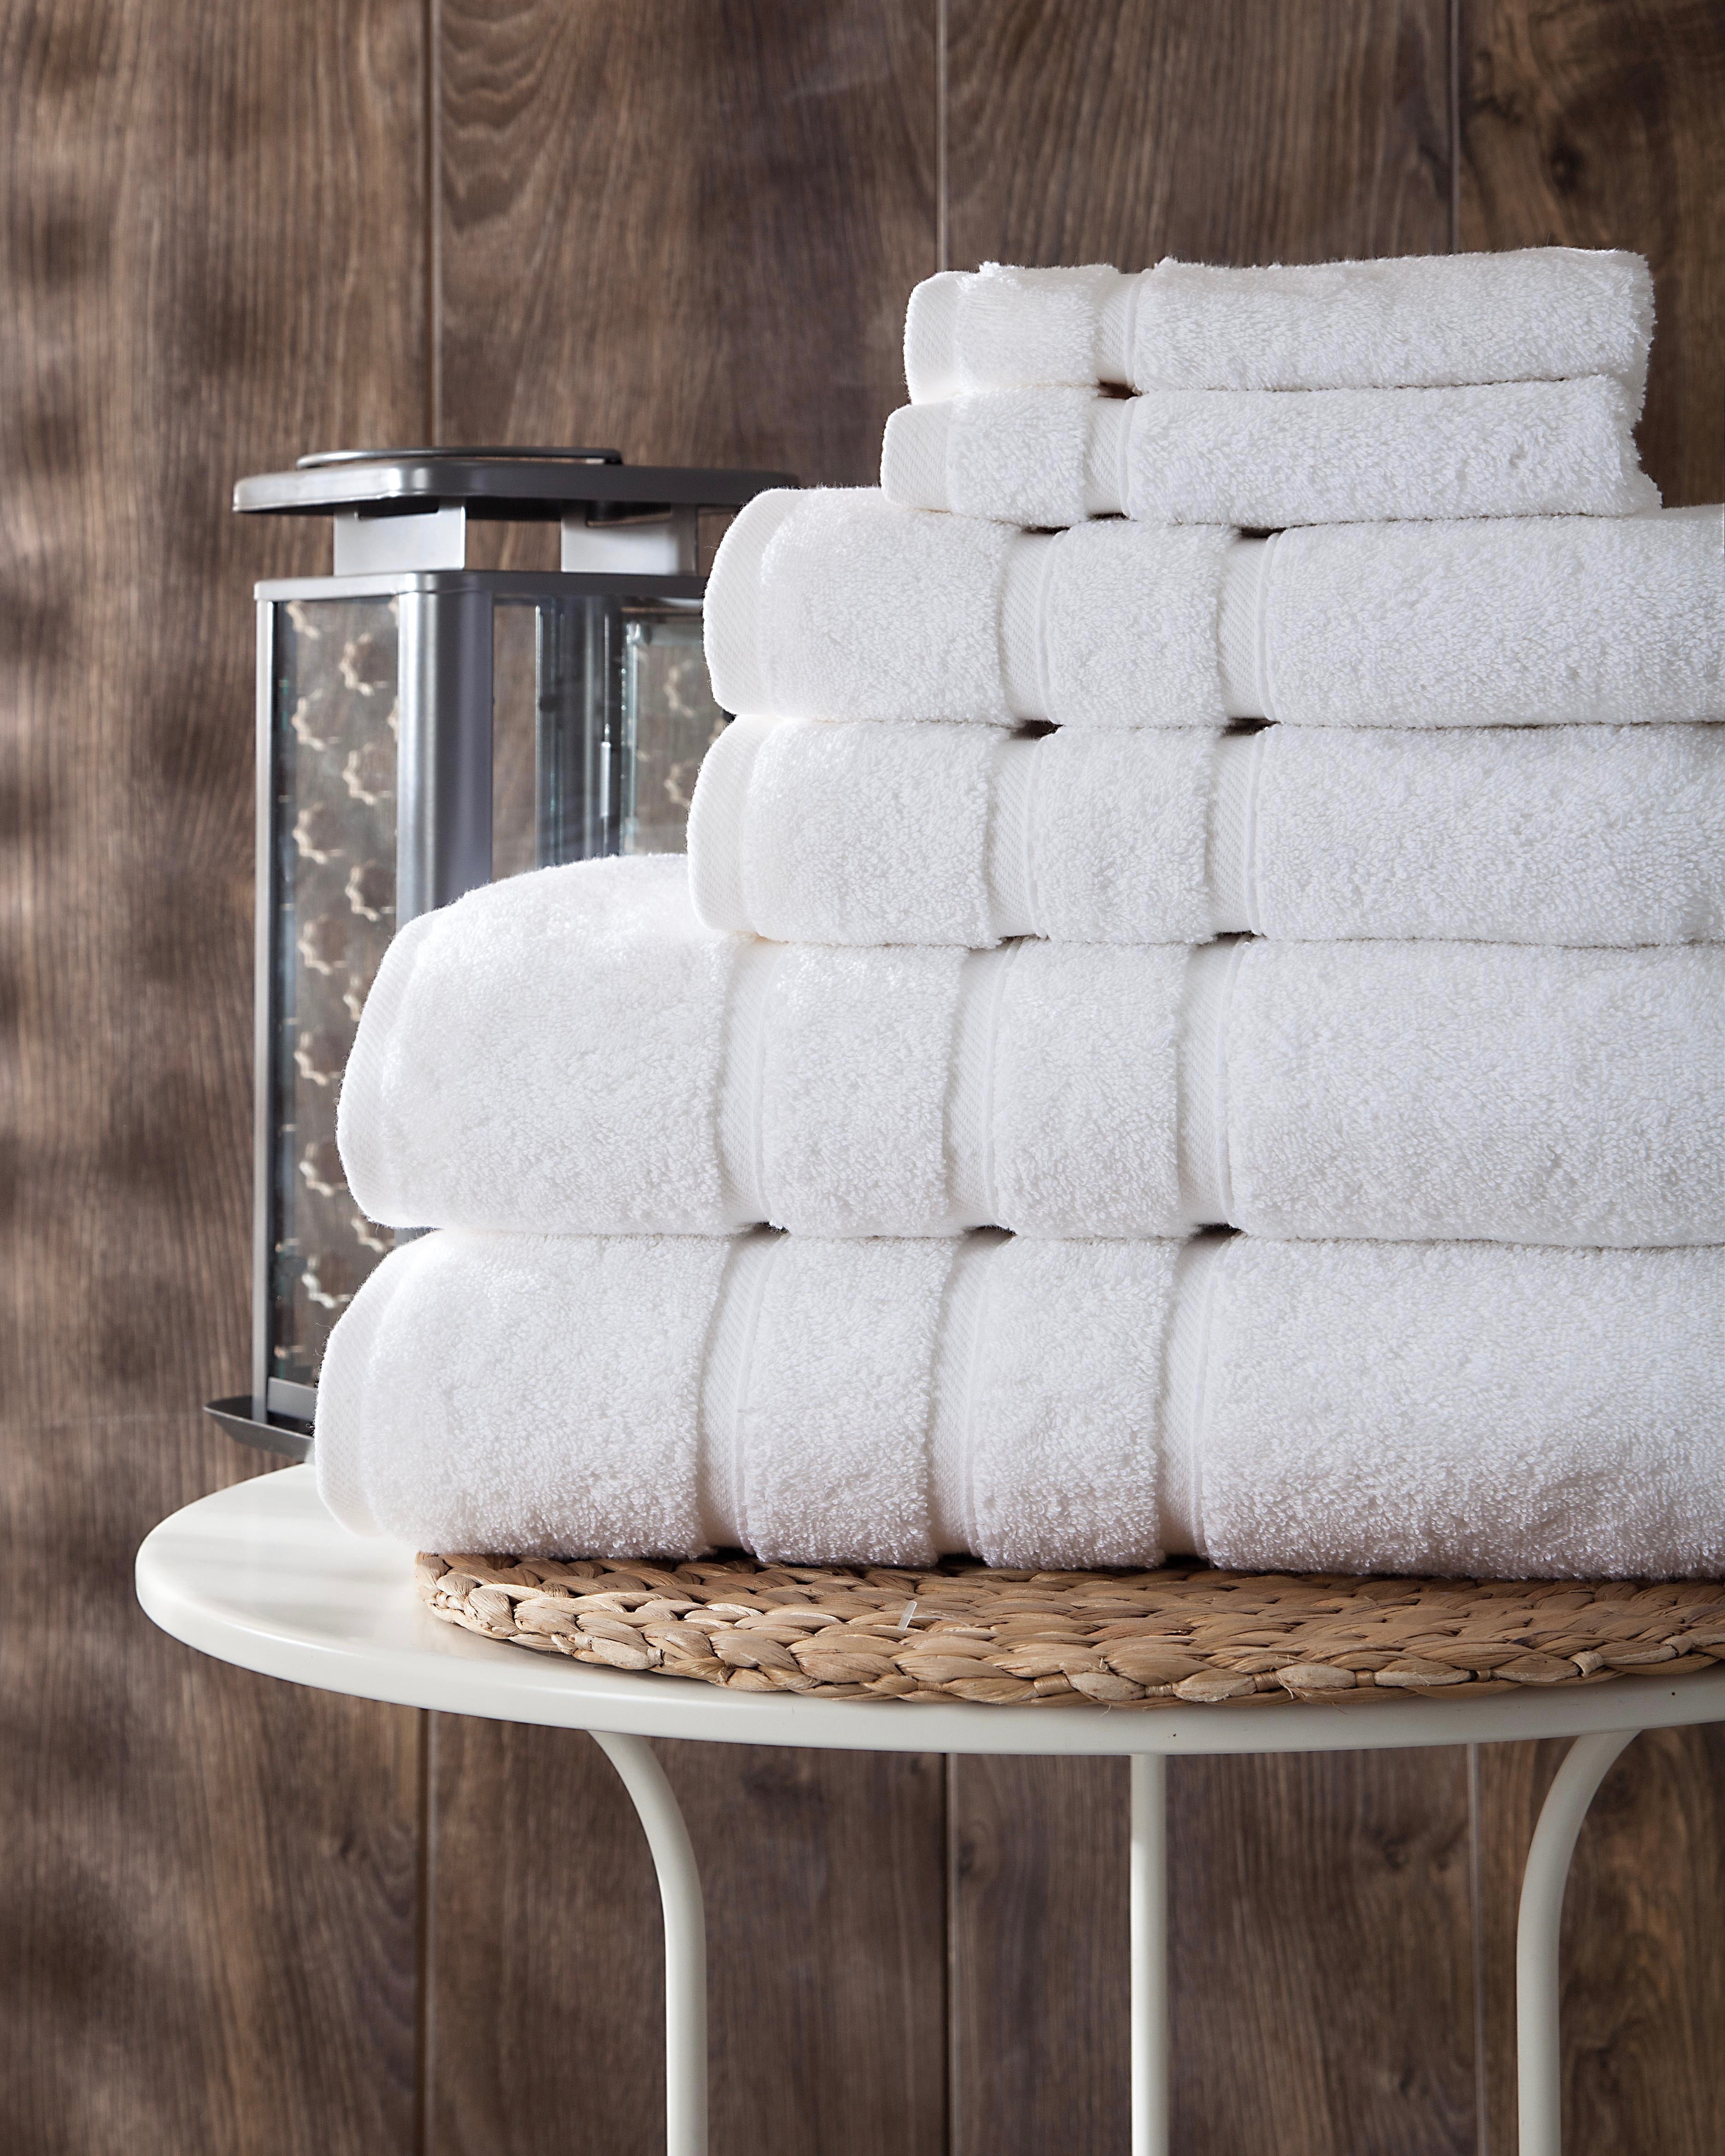 Luxury Turkish Cotton Hotel & Spa Grade Bath Towels Set Collection - Ultra  Absorbent and Soft